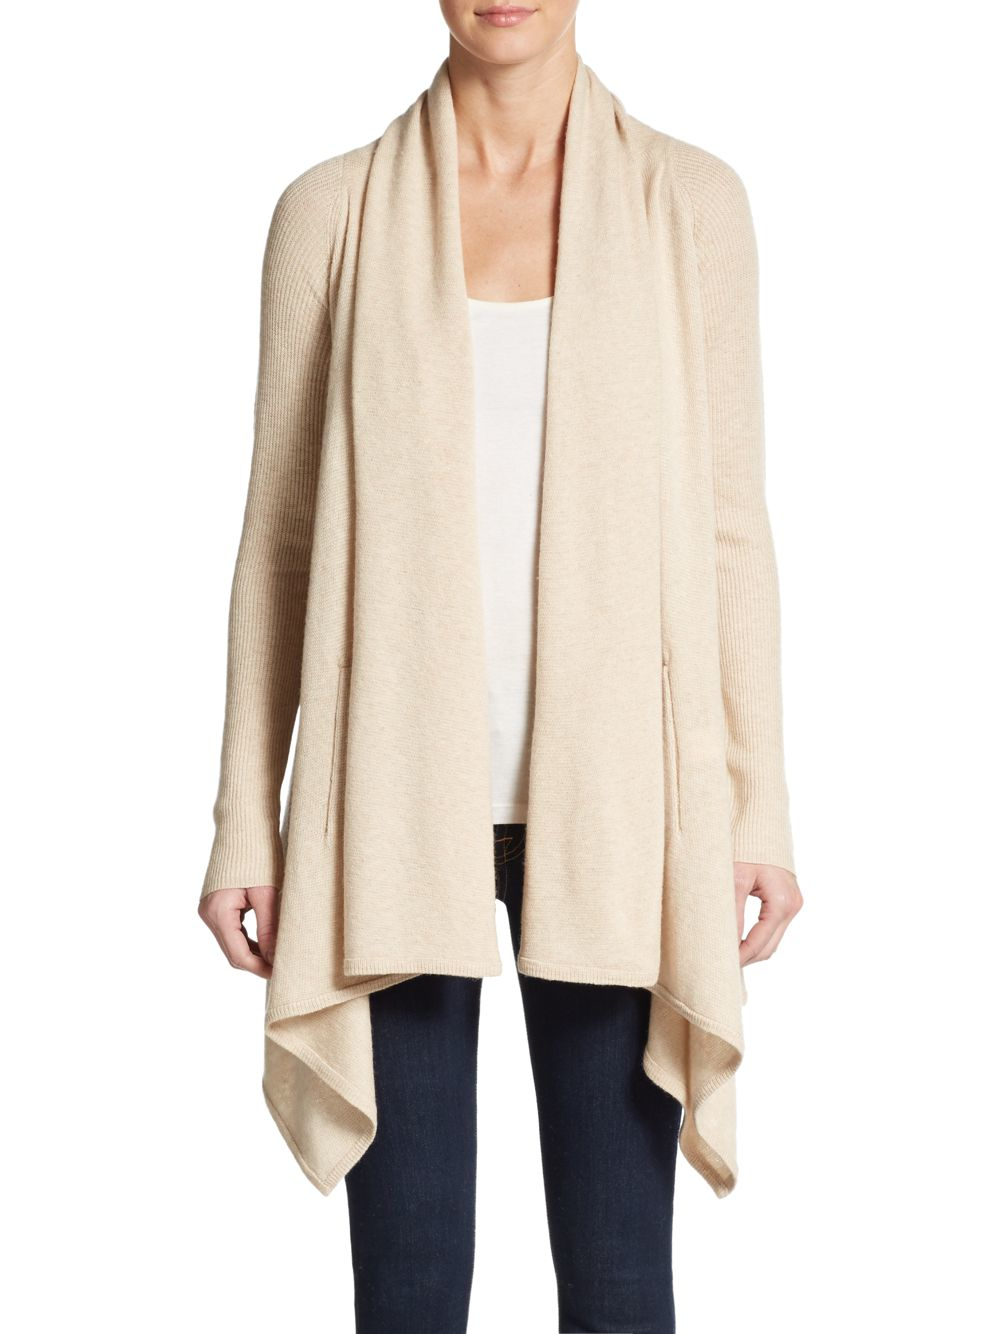 Vince Draped Wool & Cashmere Cardigan in Natural | Lyst